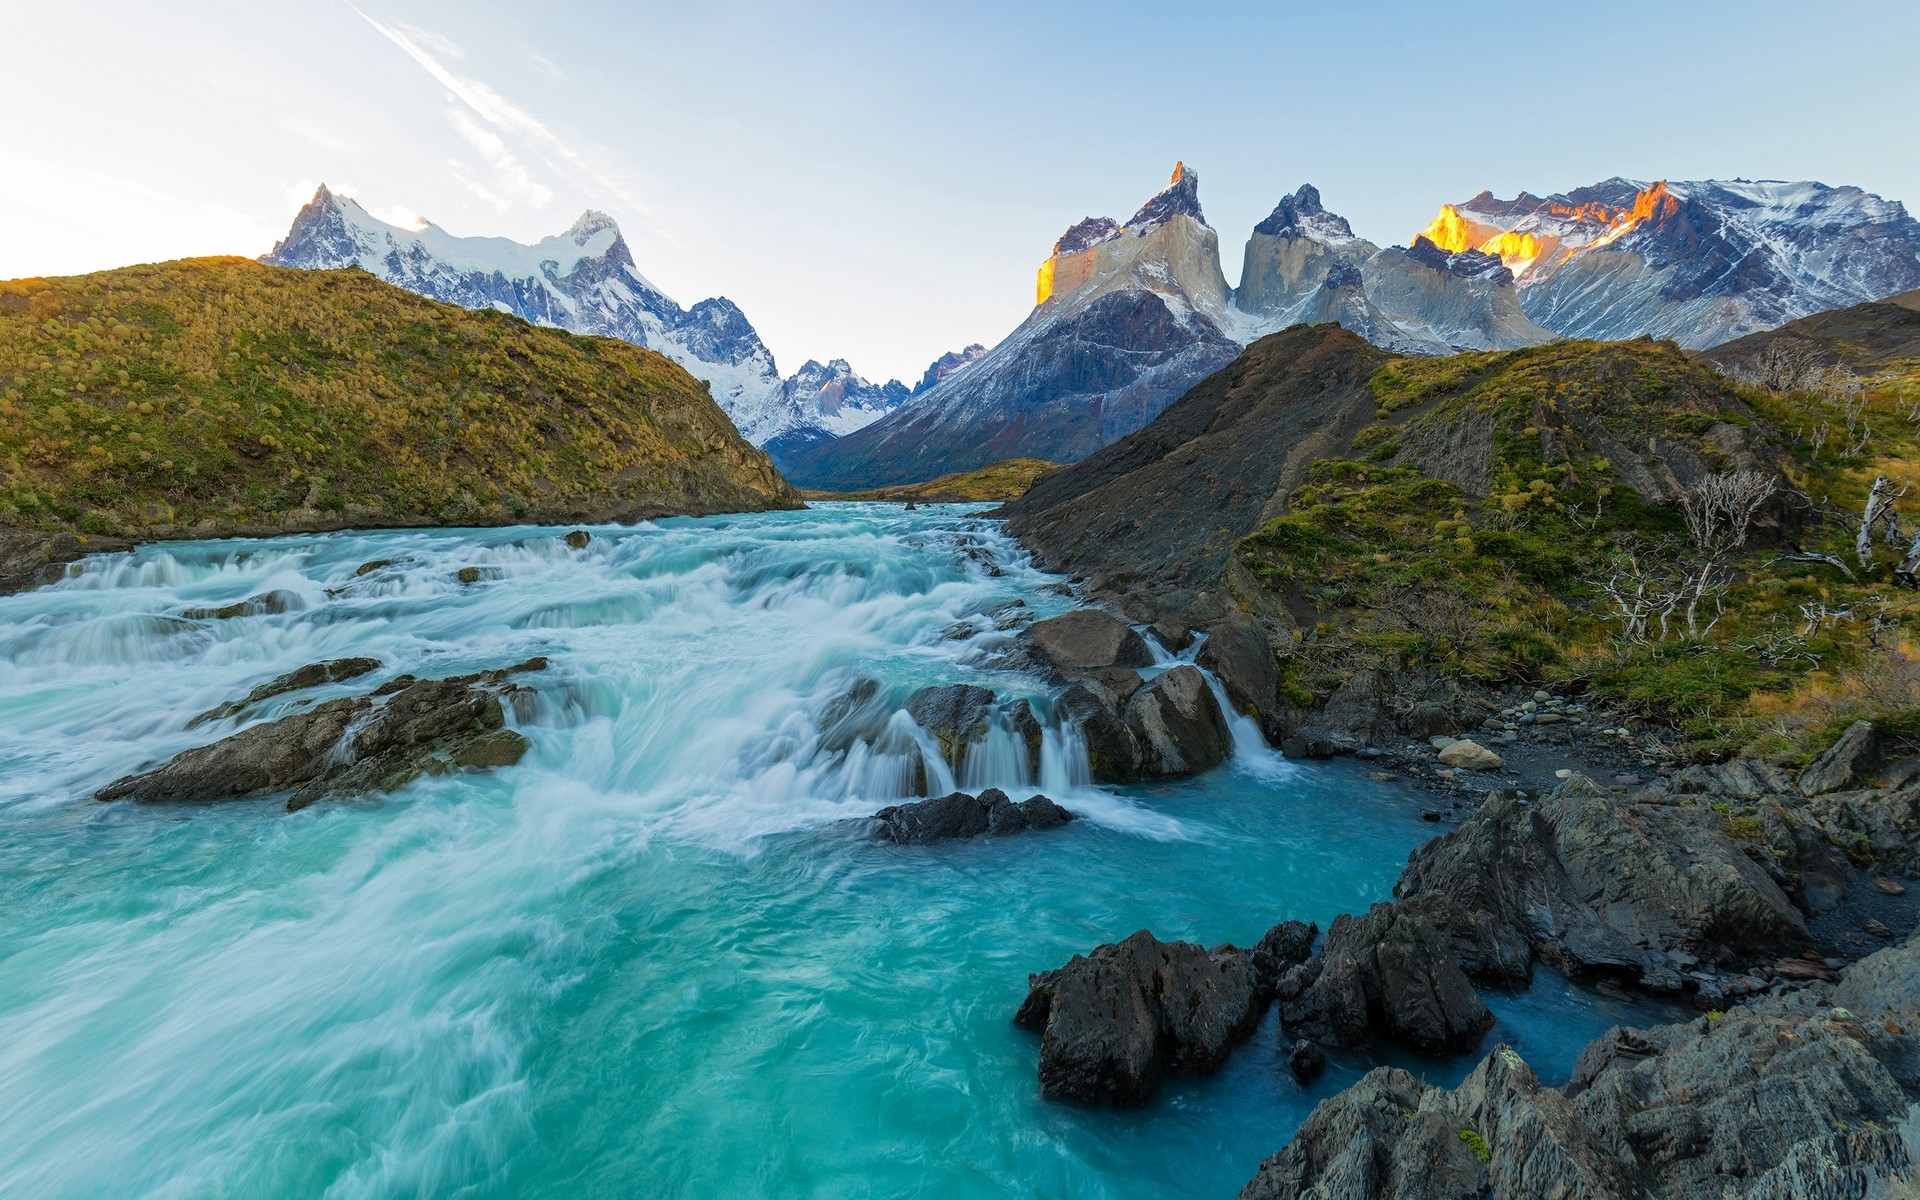 Nature Landscape Chile Mountains Sunset River Rapids Snowy Peak Torres Del Paine Turquoise Water 1920x1200